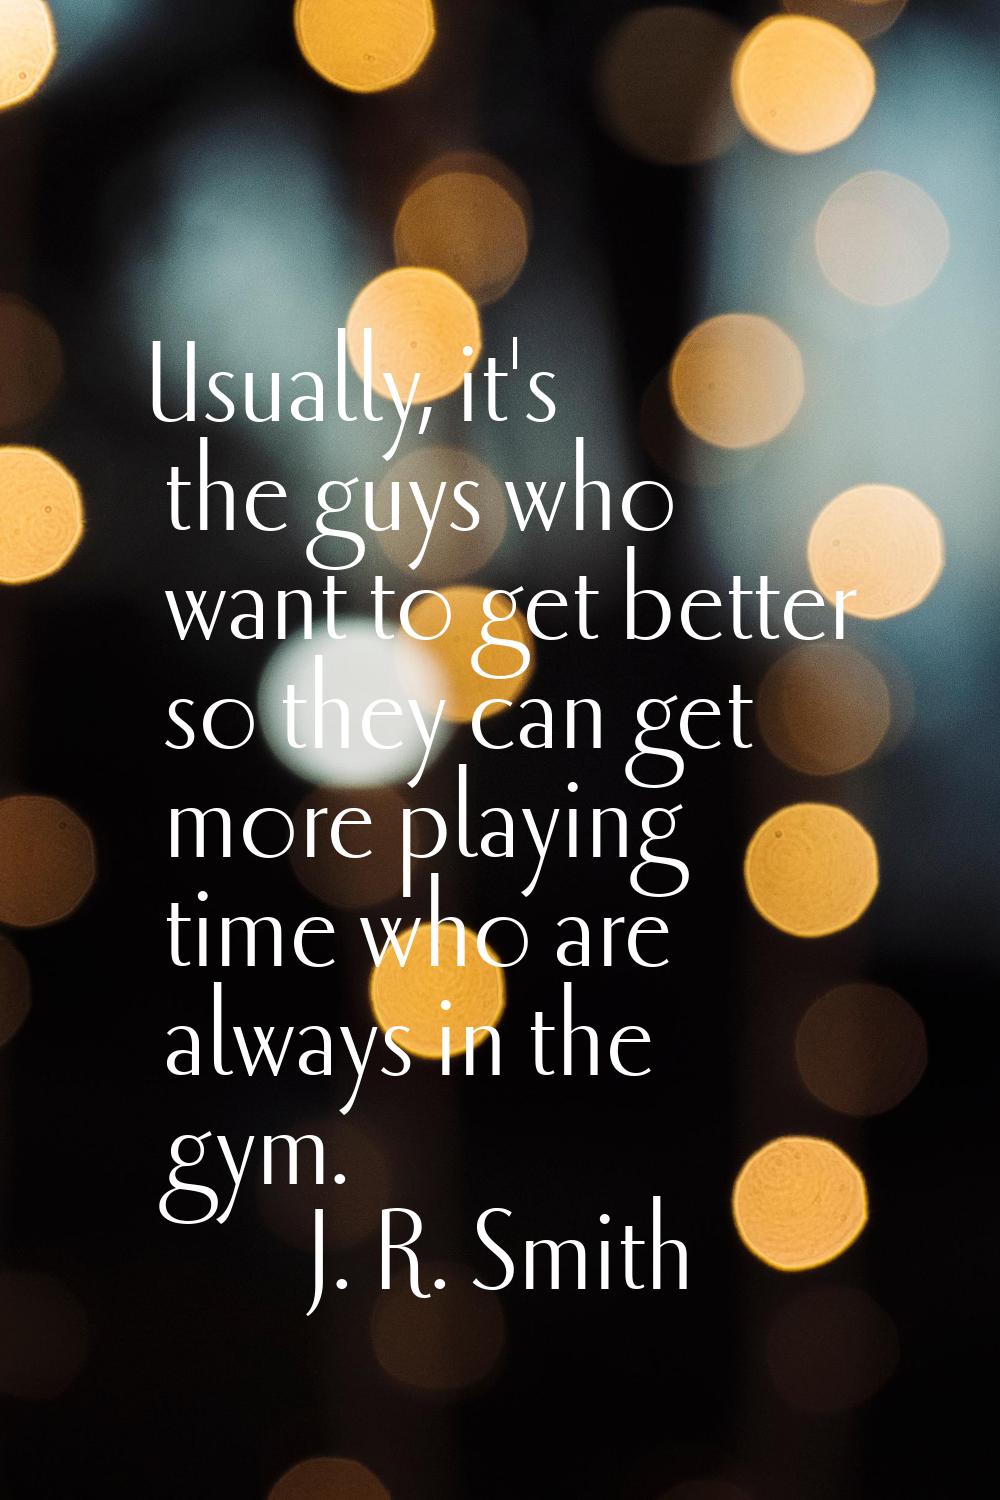 Usually, it's the guys who want to get better so they can get more playing time who are always in t